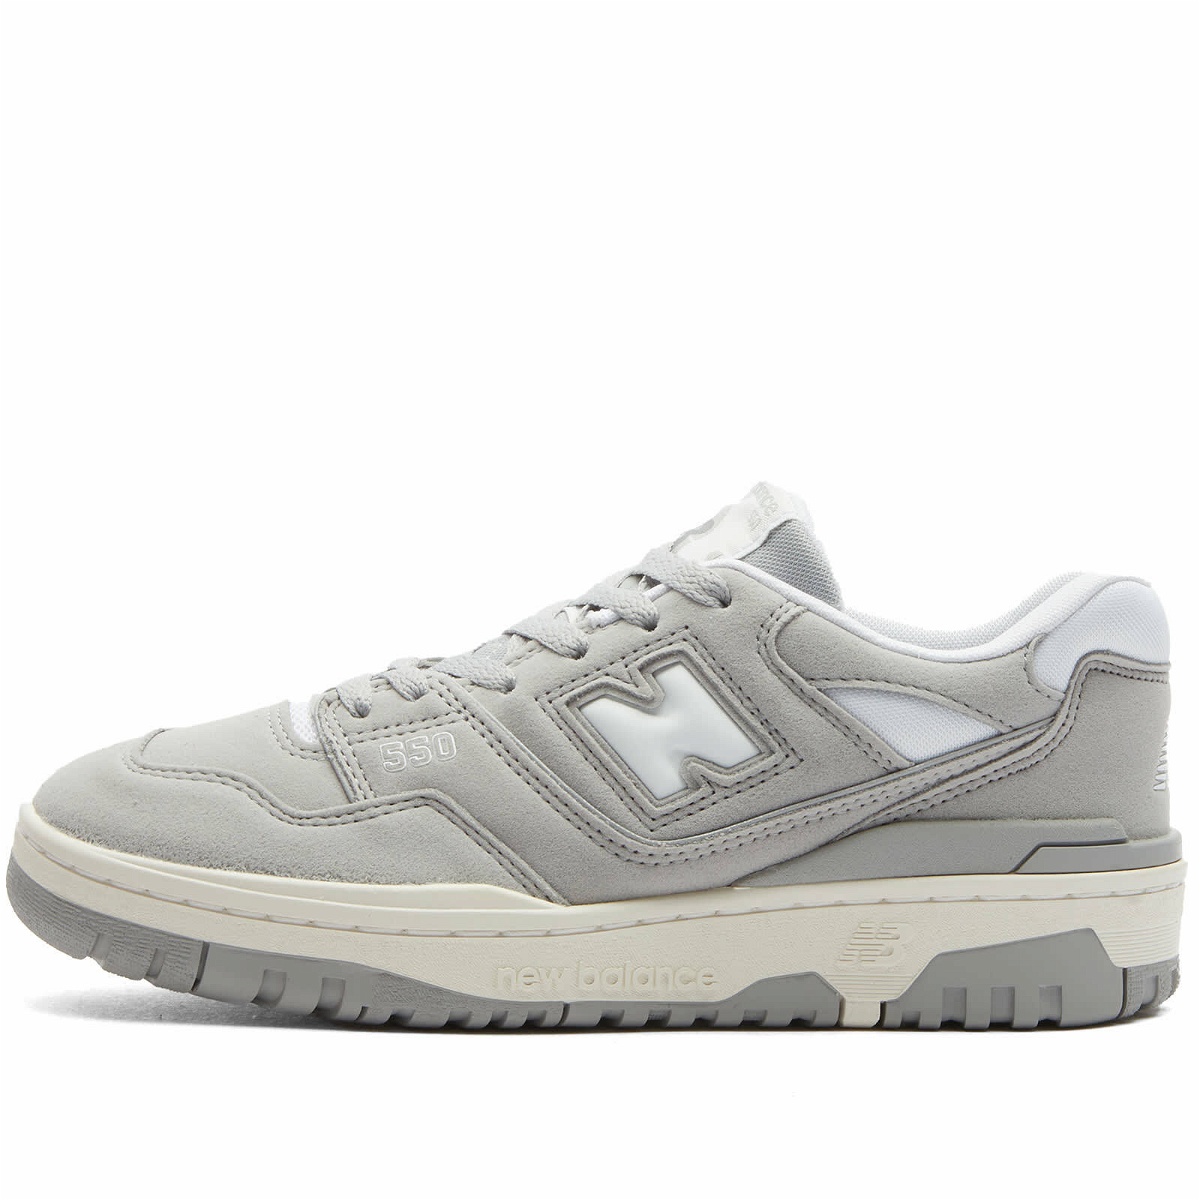 New Balance Men's GSB550NB Sneakers in Concrete New Balance